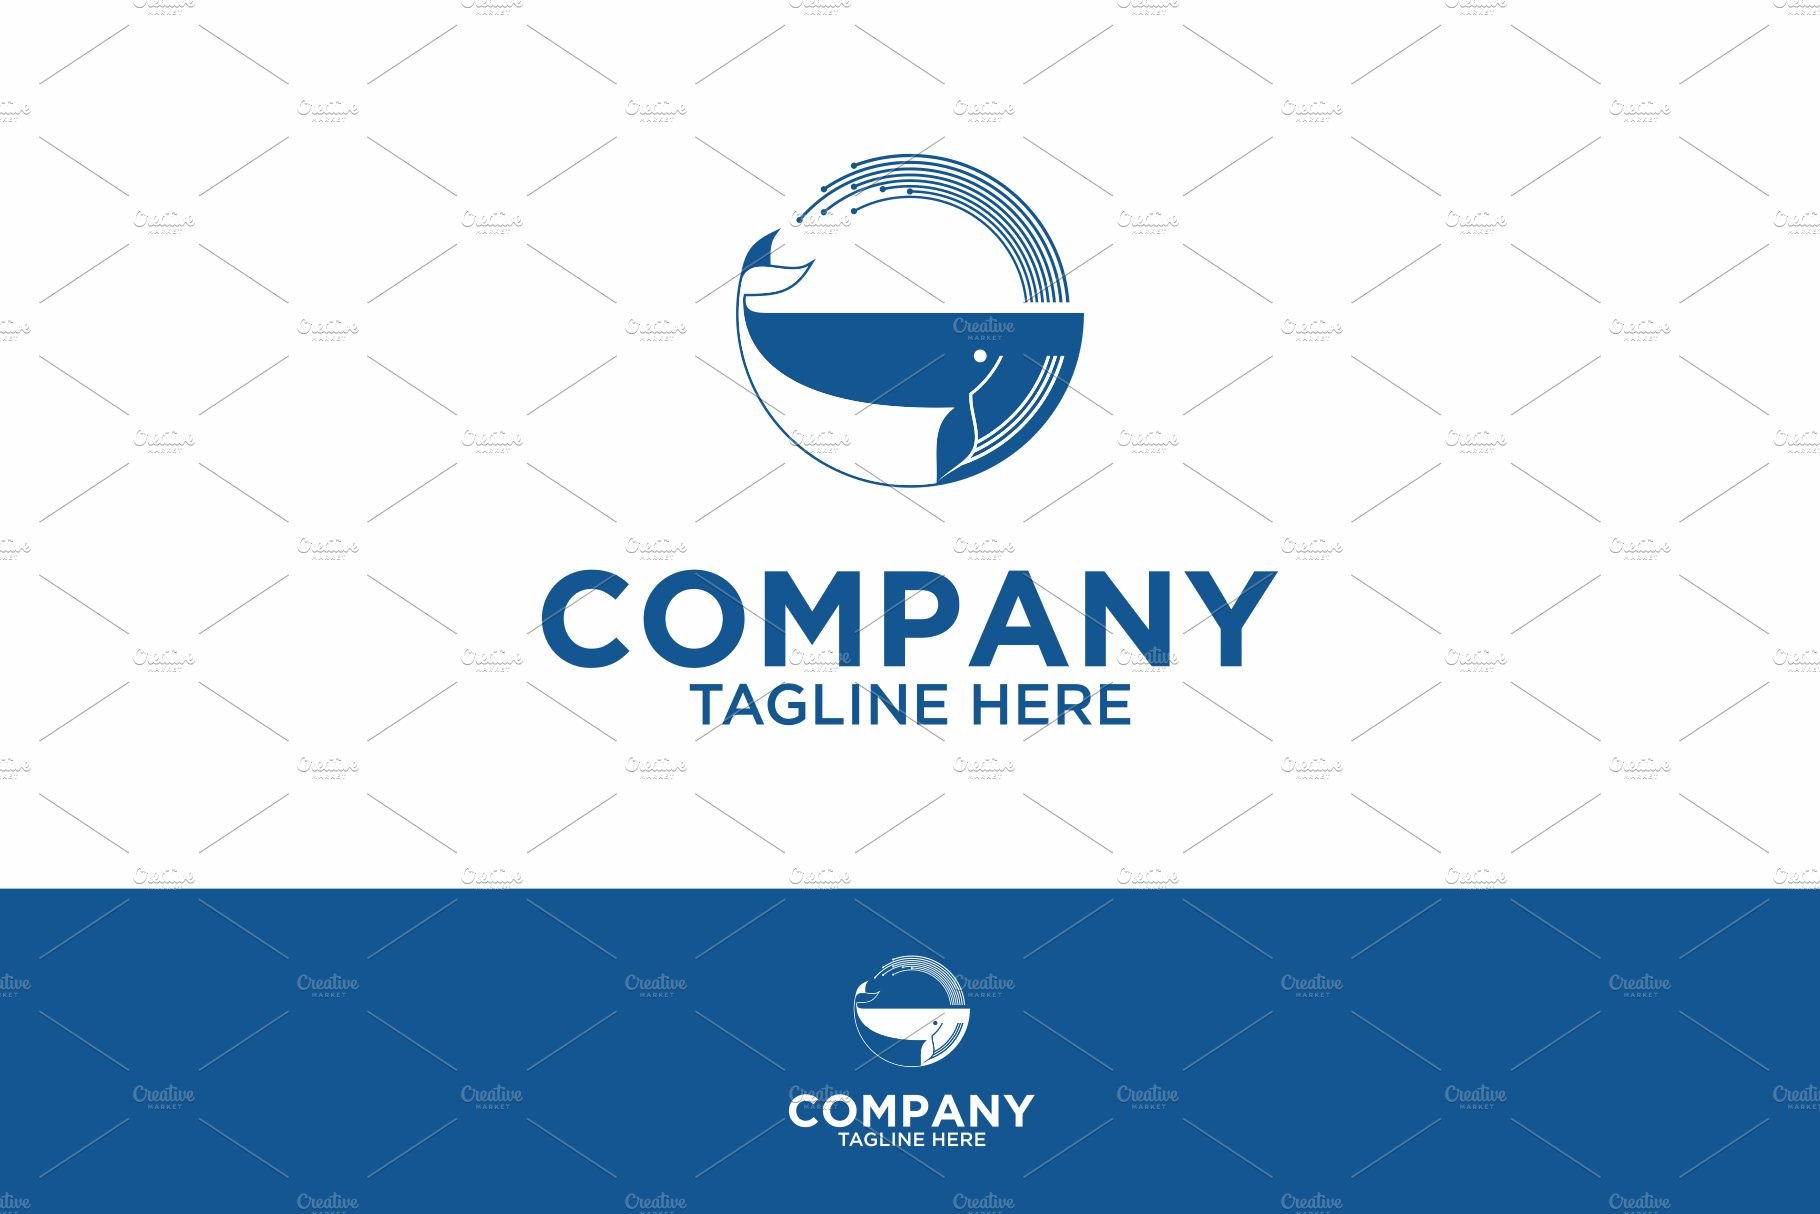 Whale logo design template cover image.